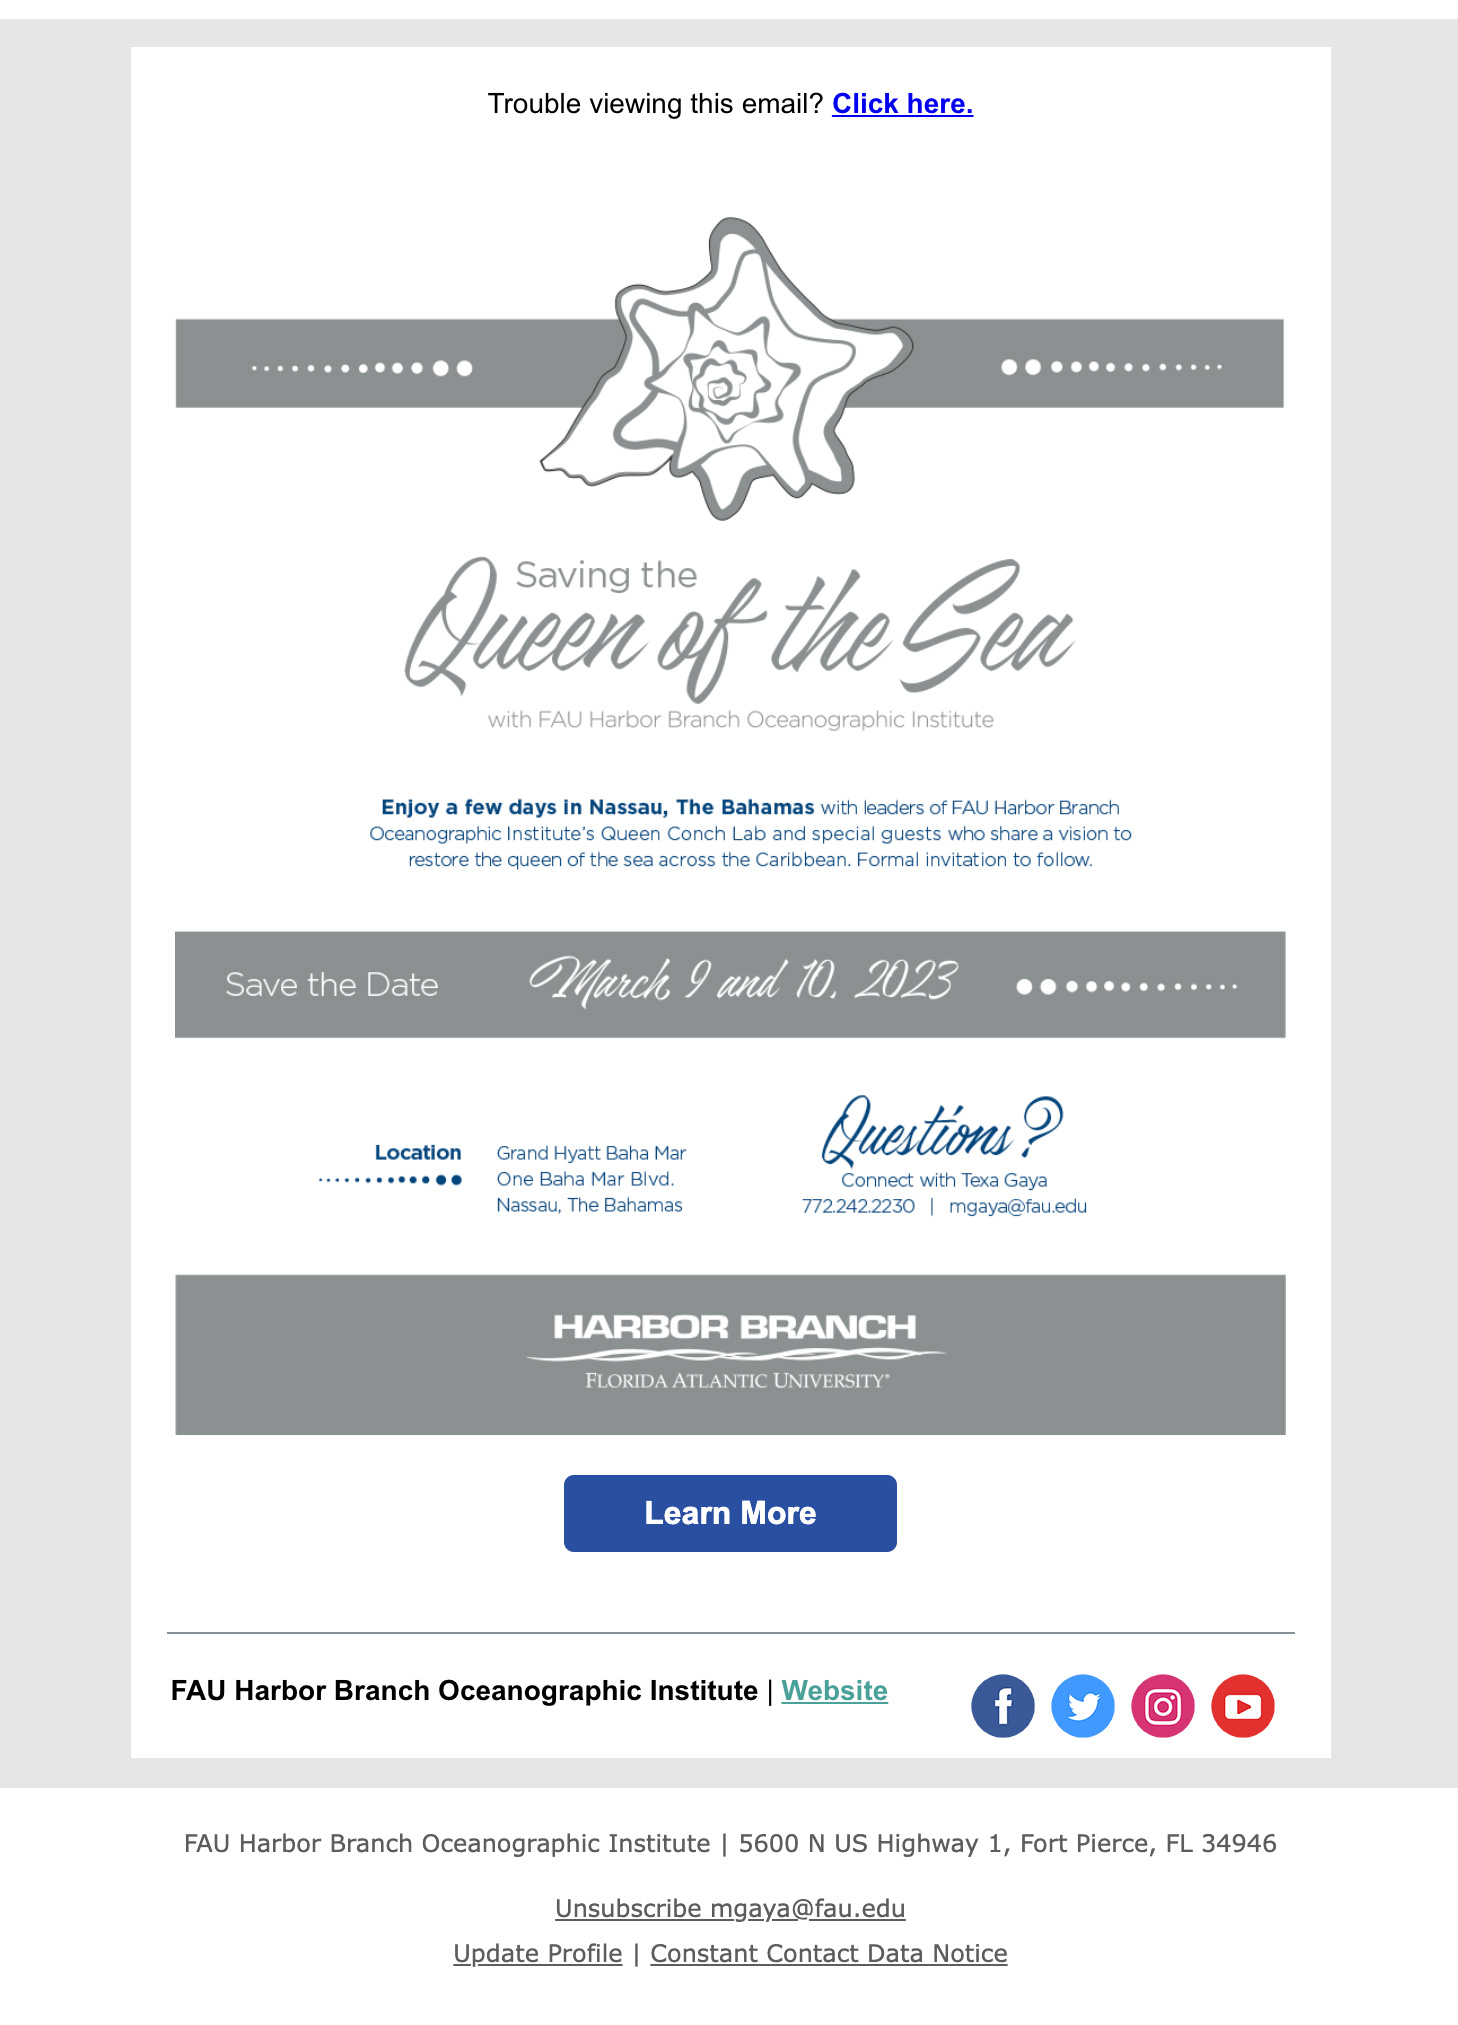 Queen of the Sea email